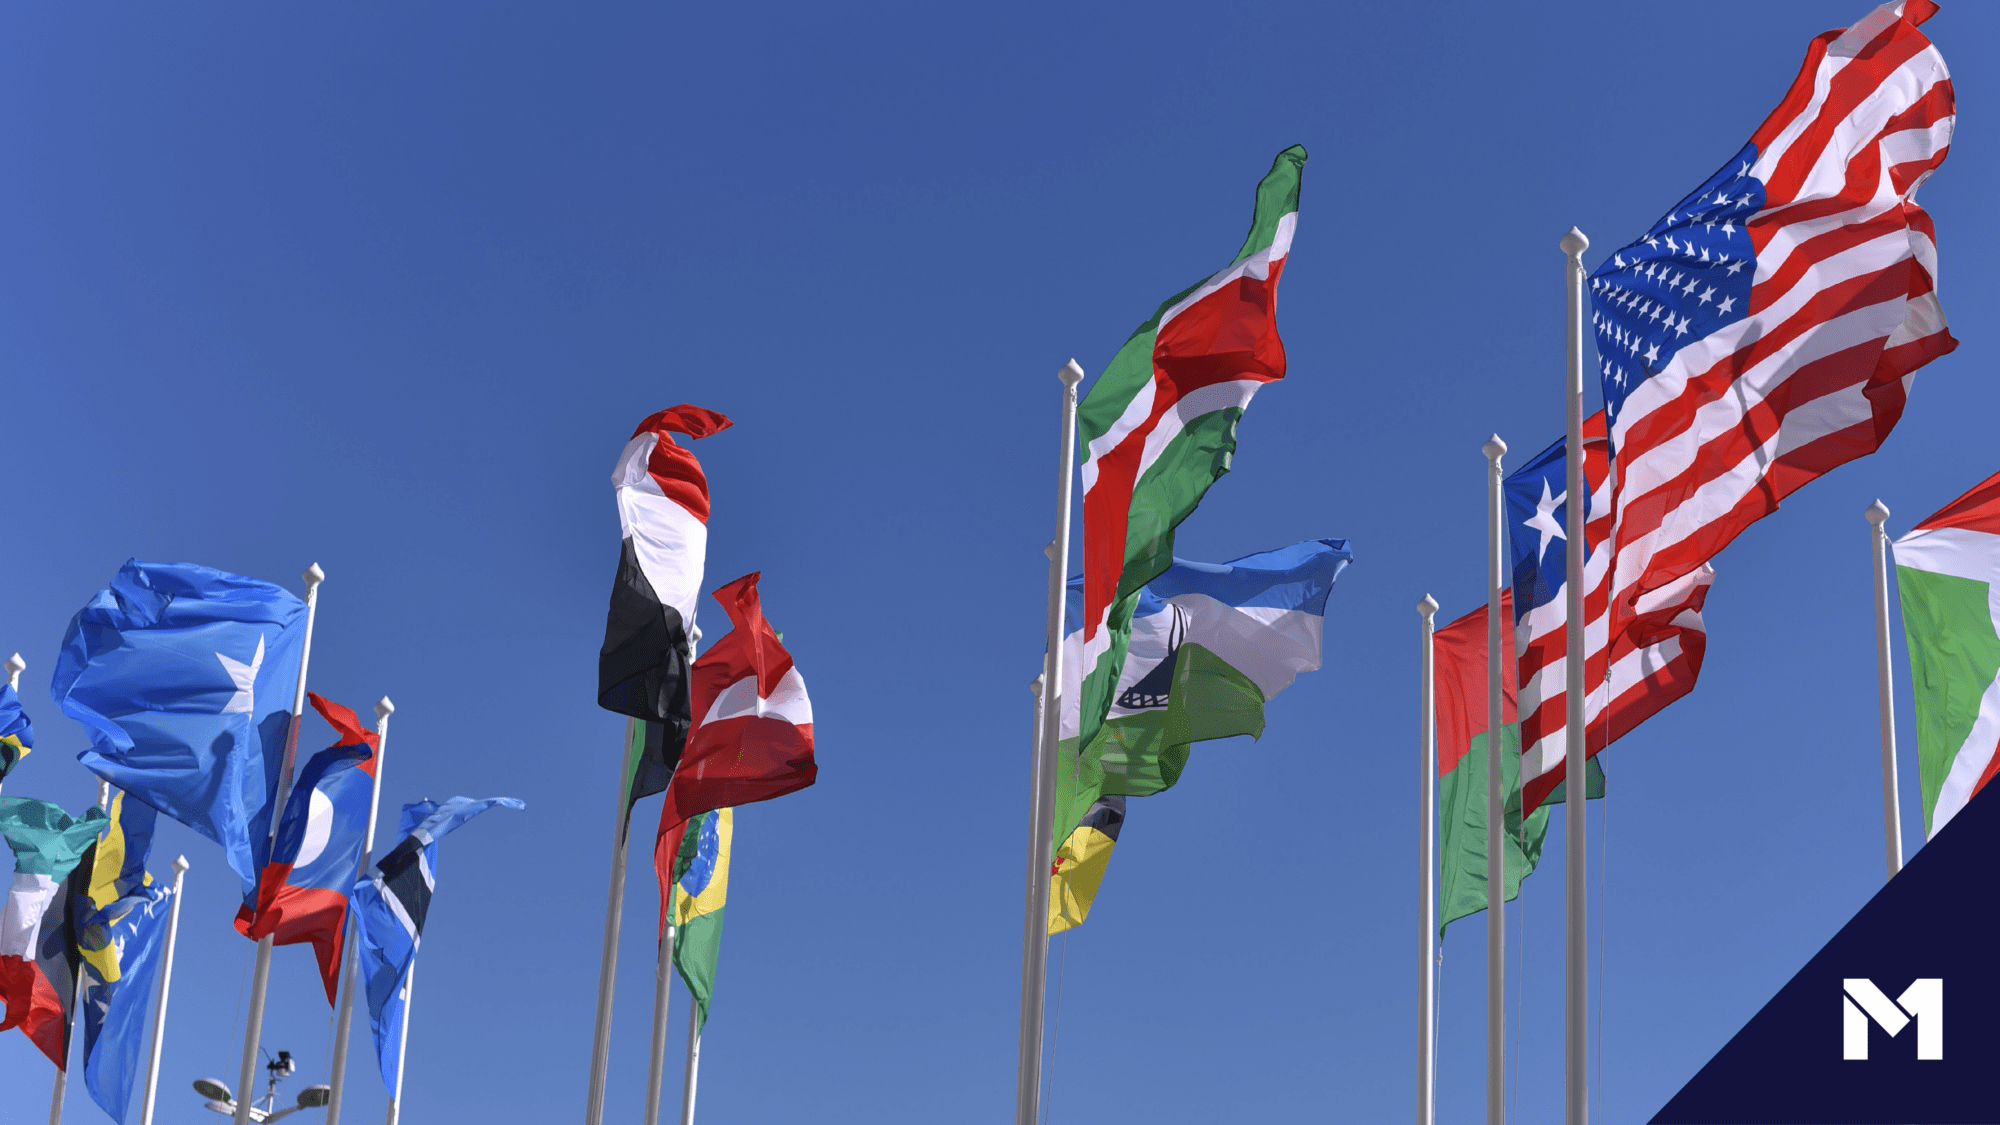 The national flags of numerous countries, indicating international collaboration.